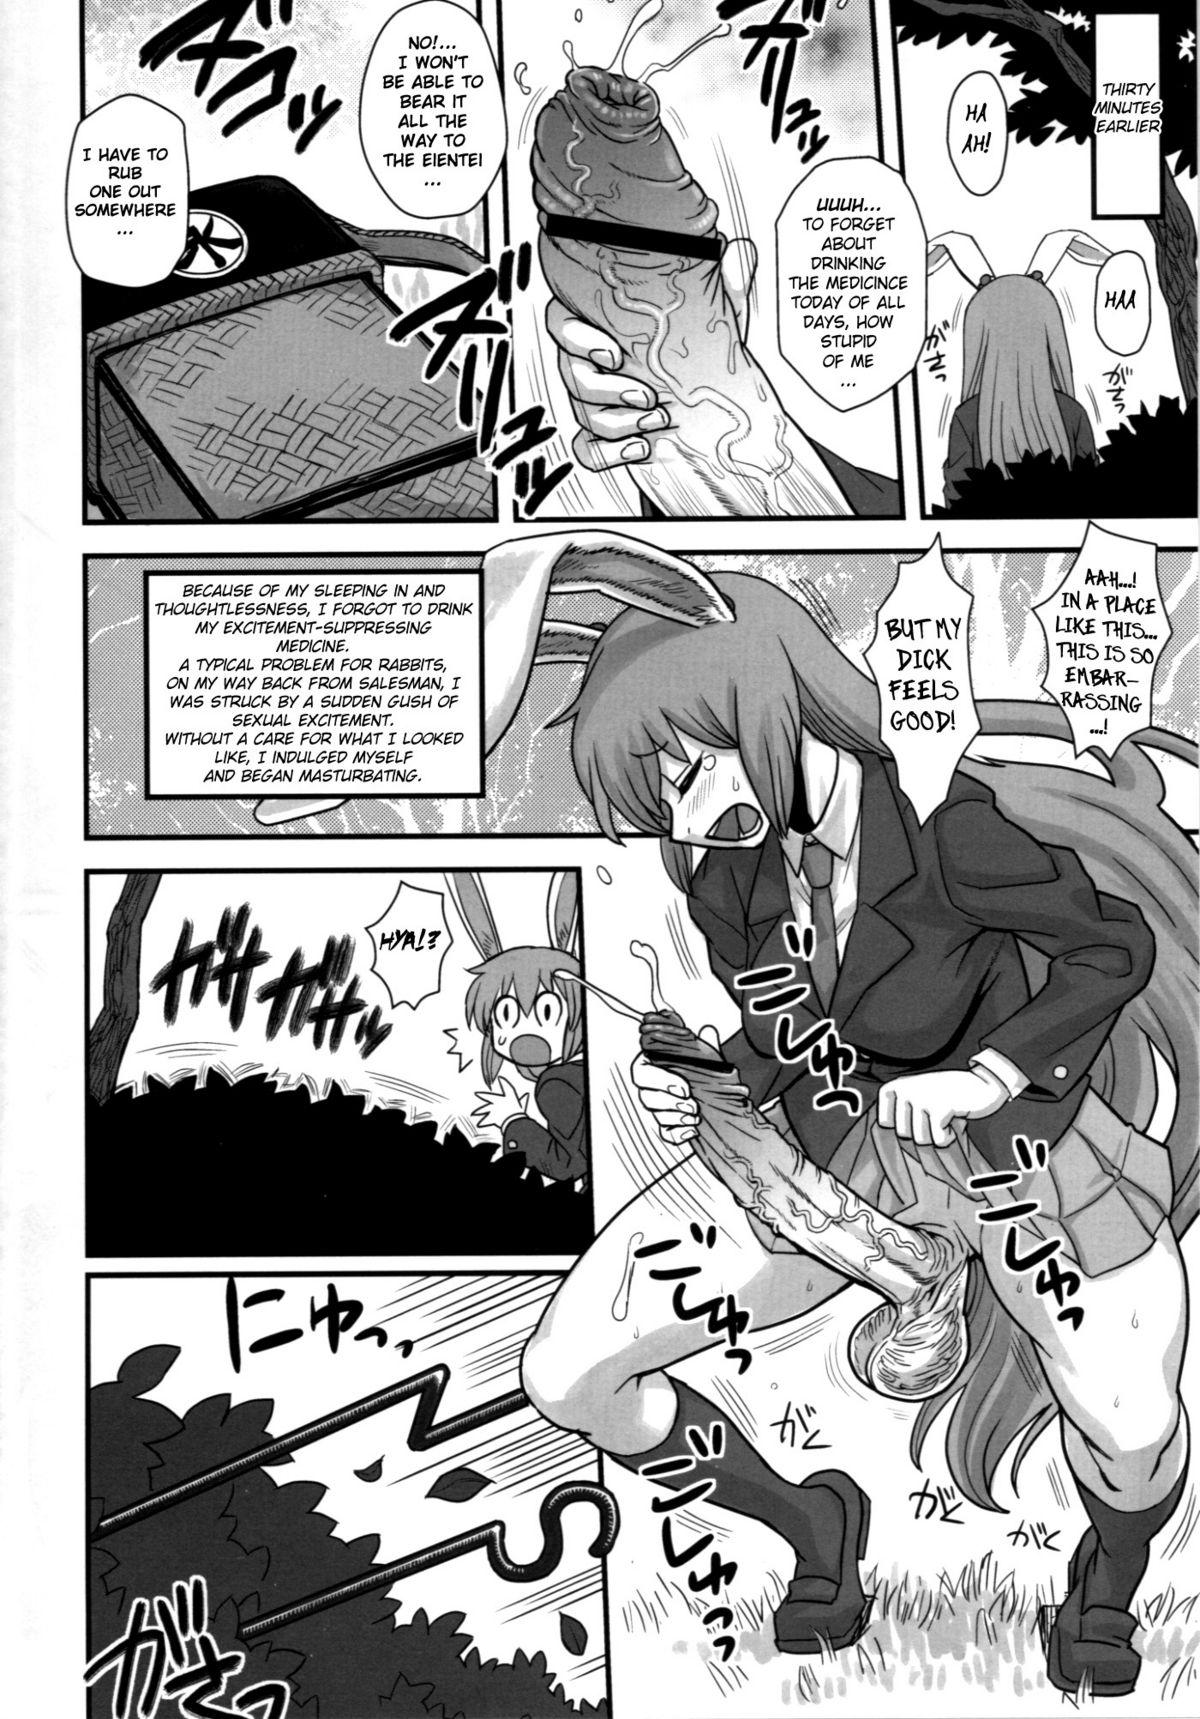 Linda Lunatic Udon - Touhou project Girlfriends - Page 3